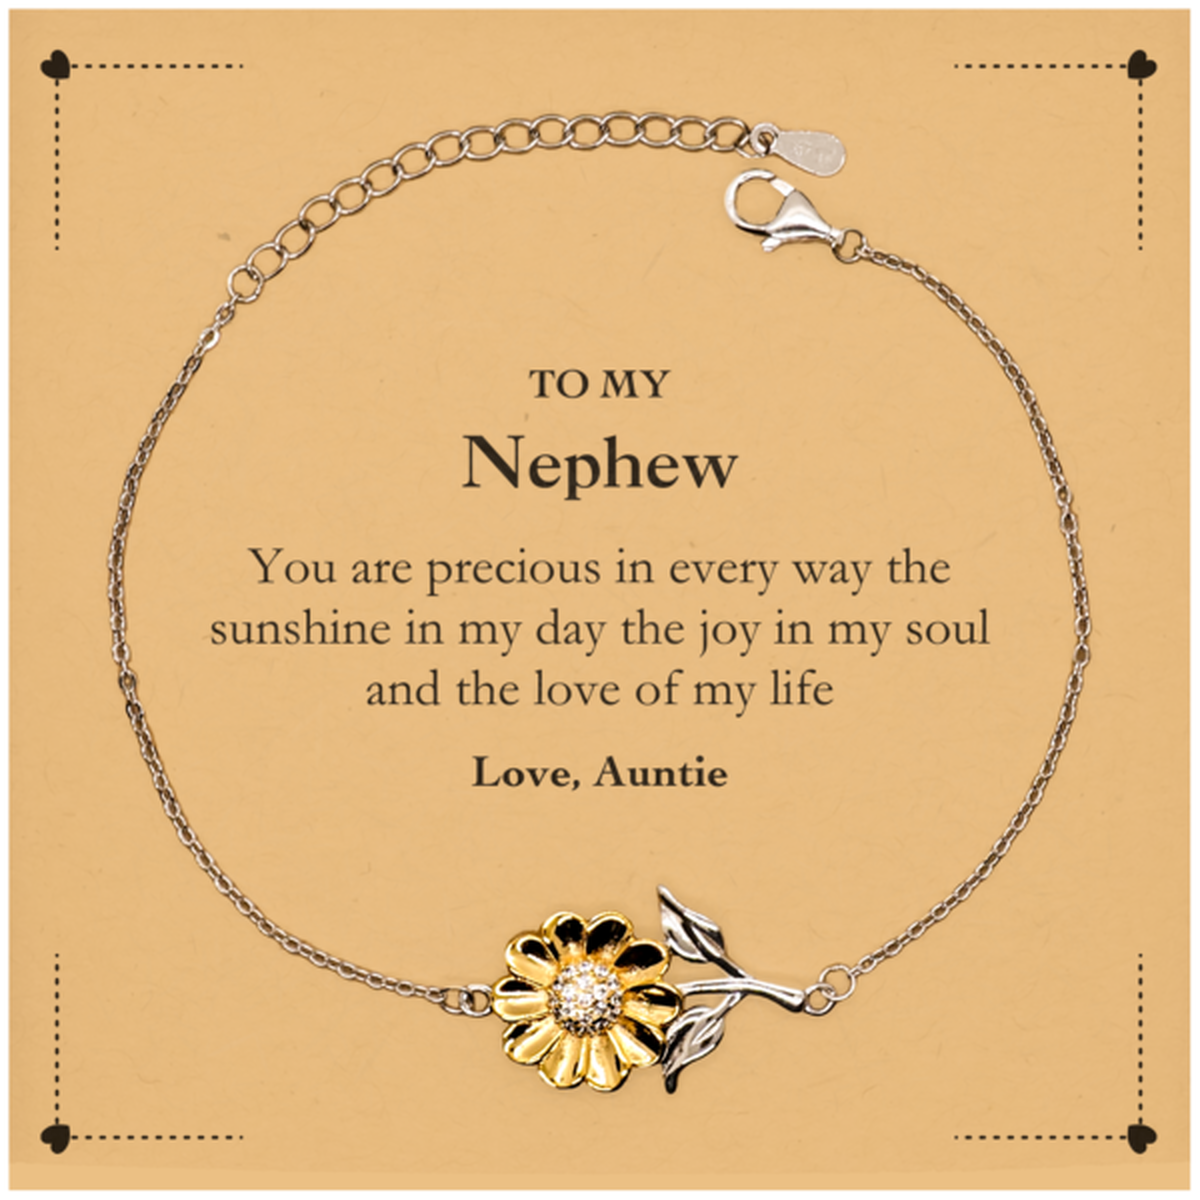 Graduation Gifts for Nephew Sunflower Bracelet Present from Auntie, Christmas Nephew Birthday Gifts Nephew You are precious in every way the sunshine in my day. Love, Auntie